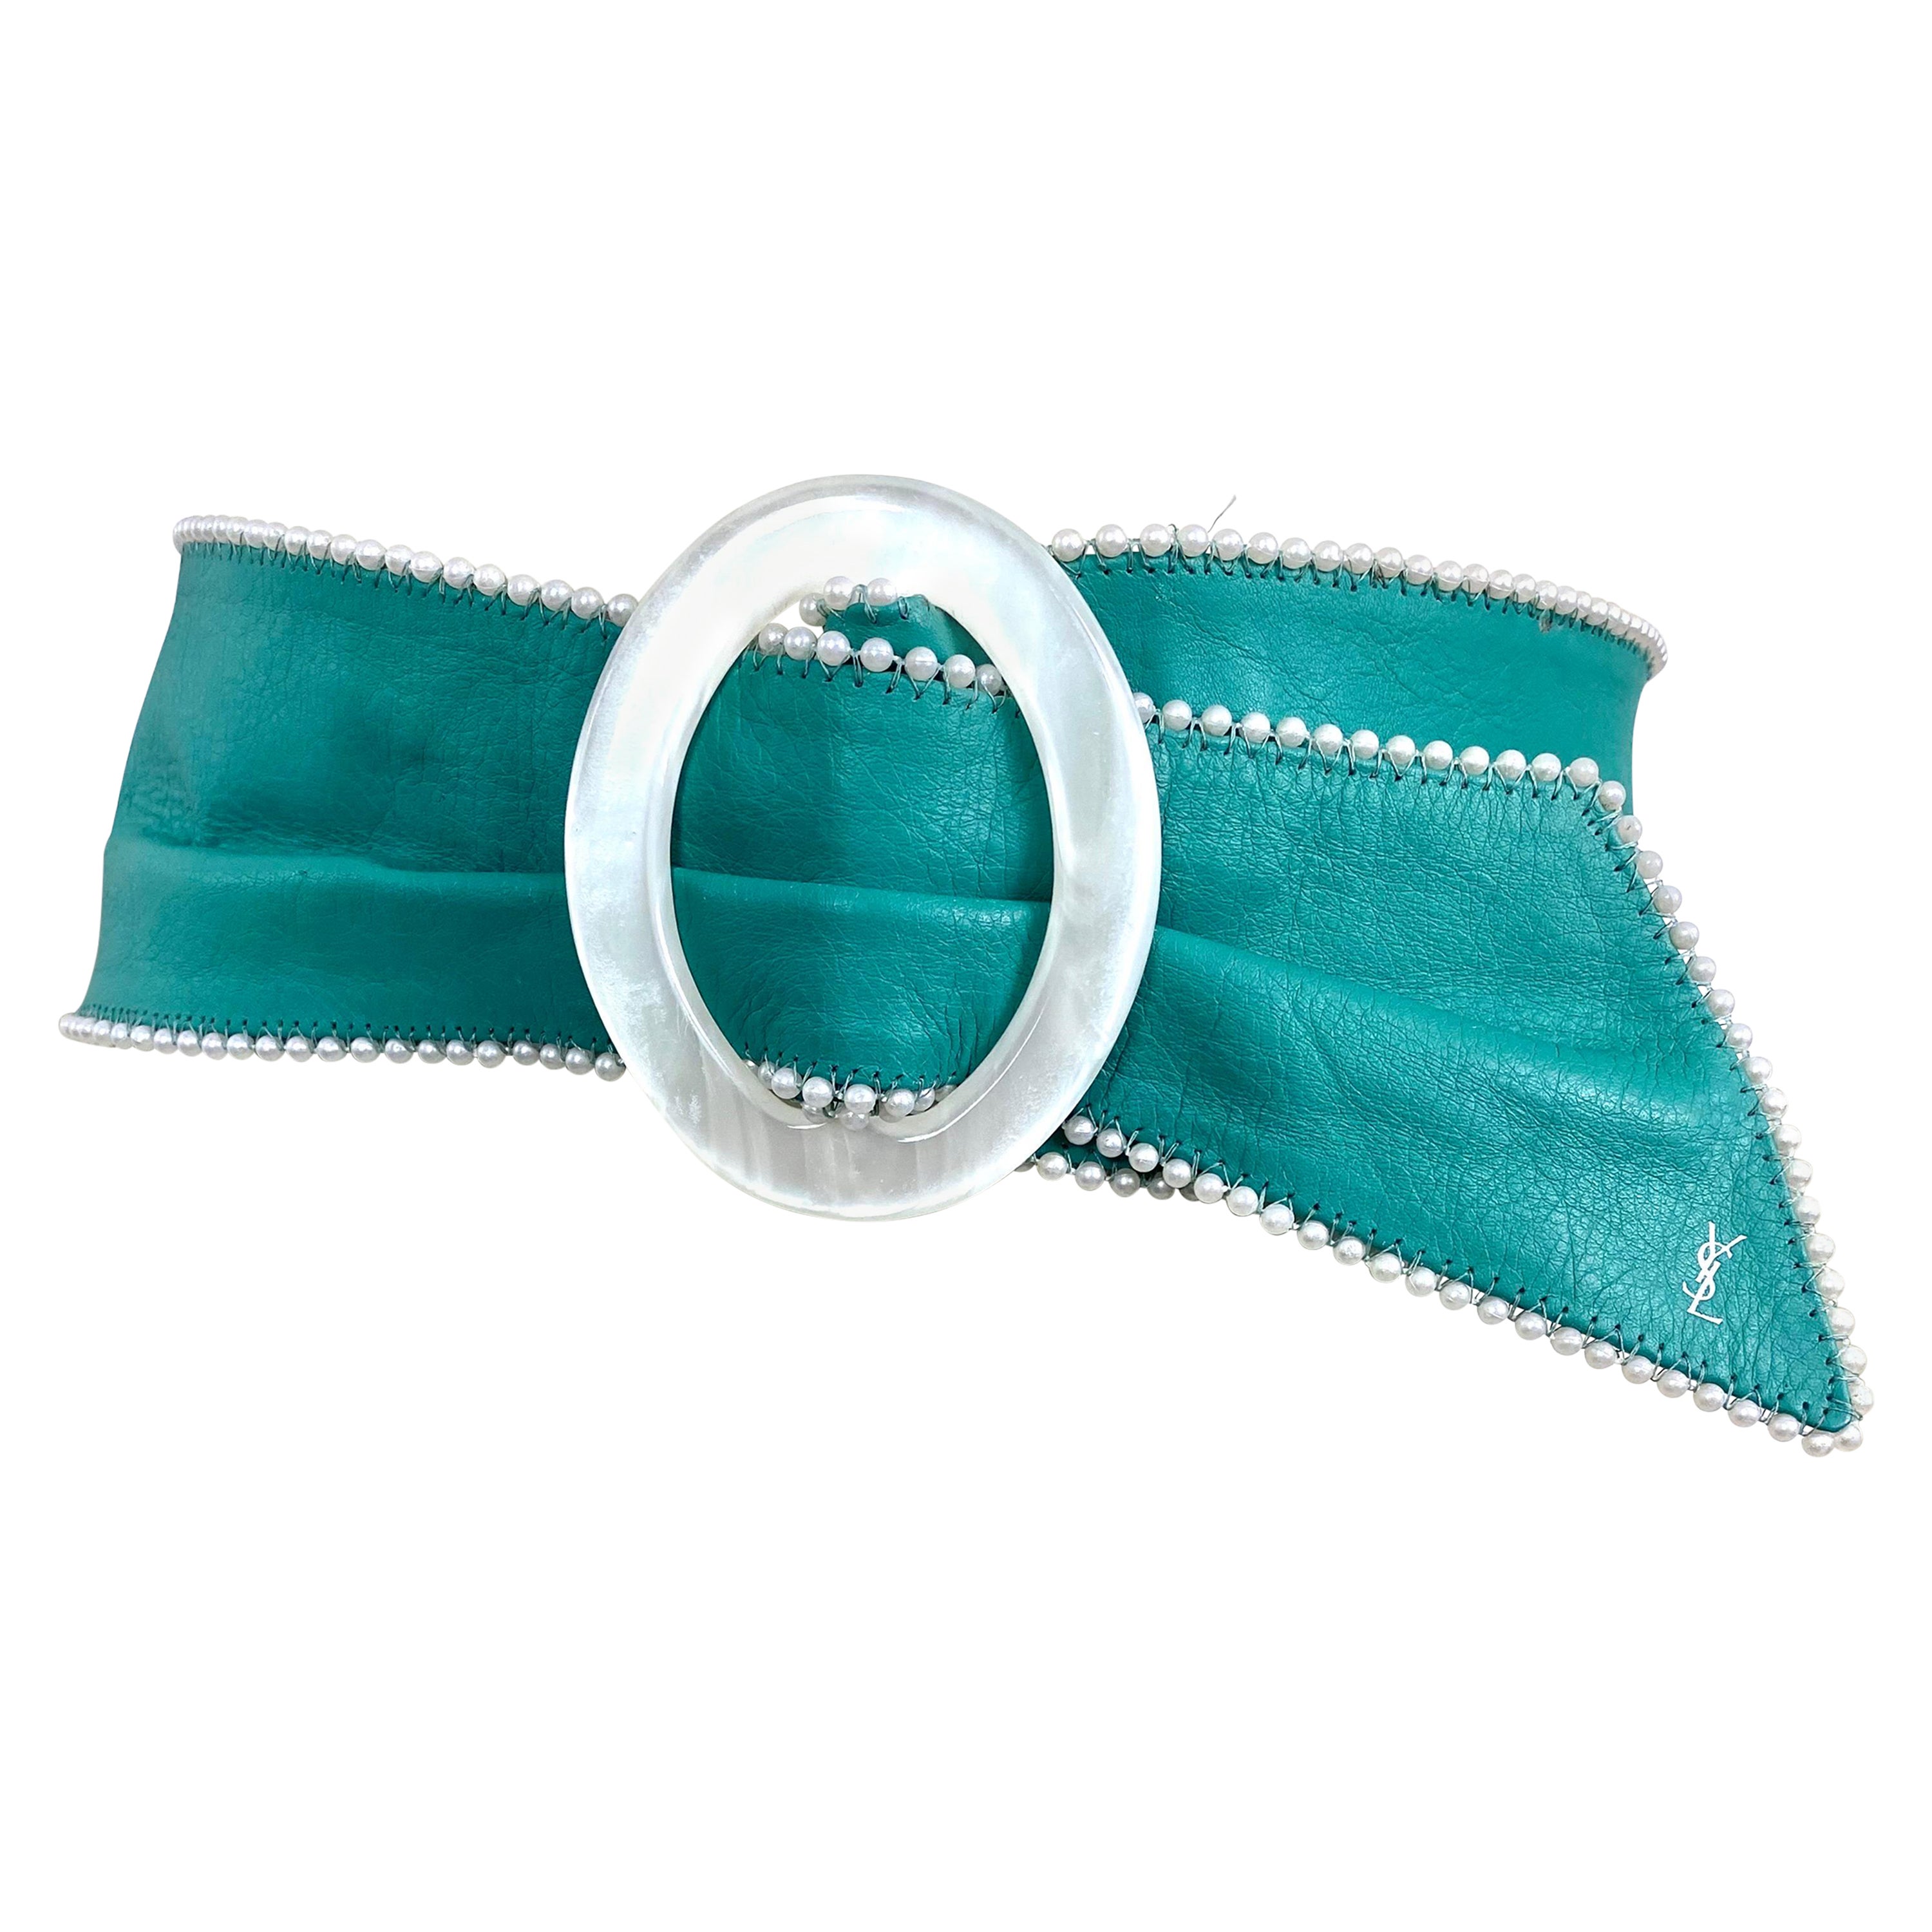 Vintage Yves Saint Laurent turquoise leather belt with pearls and pearly buckle